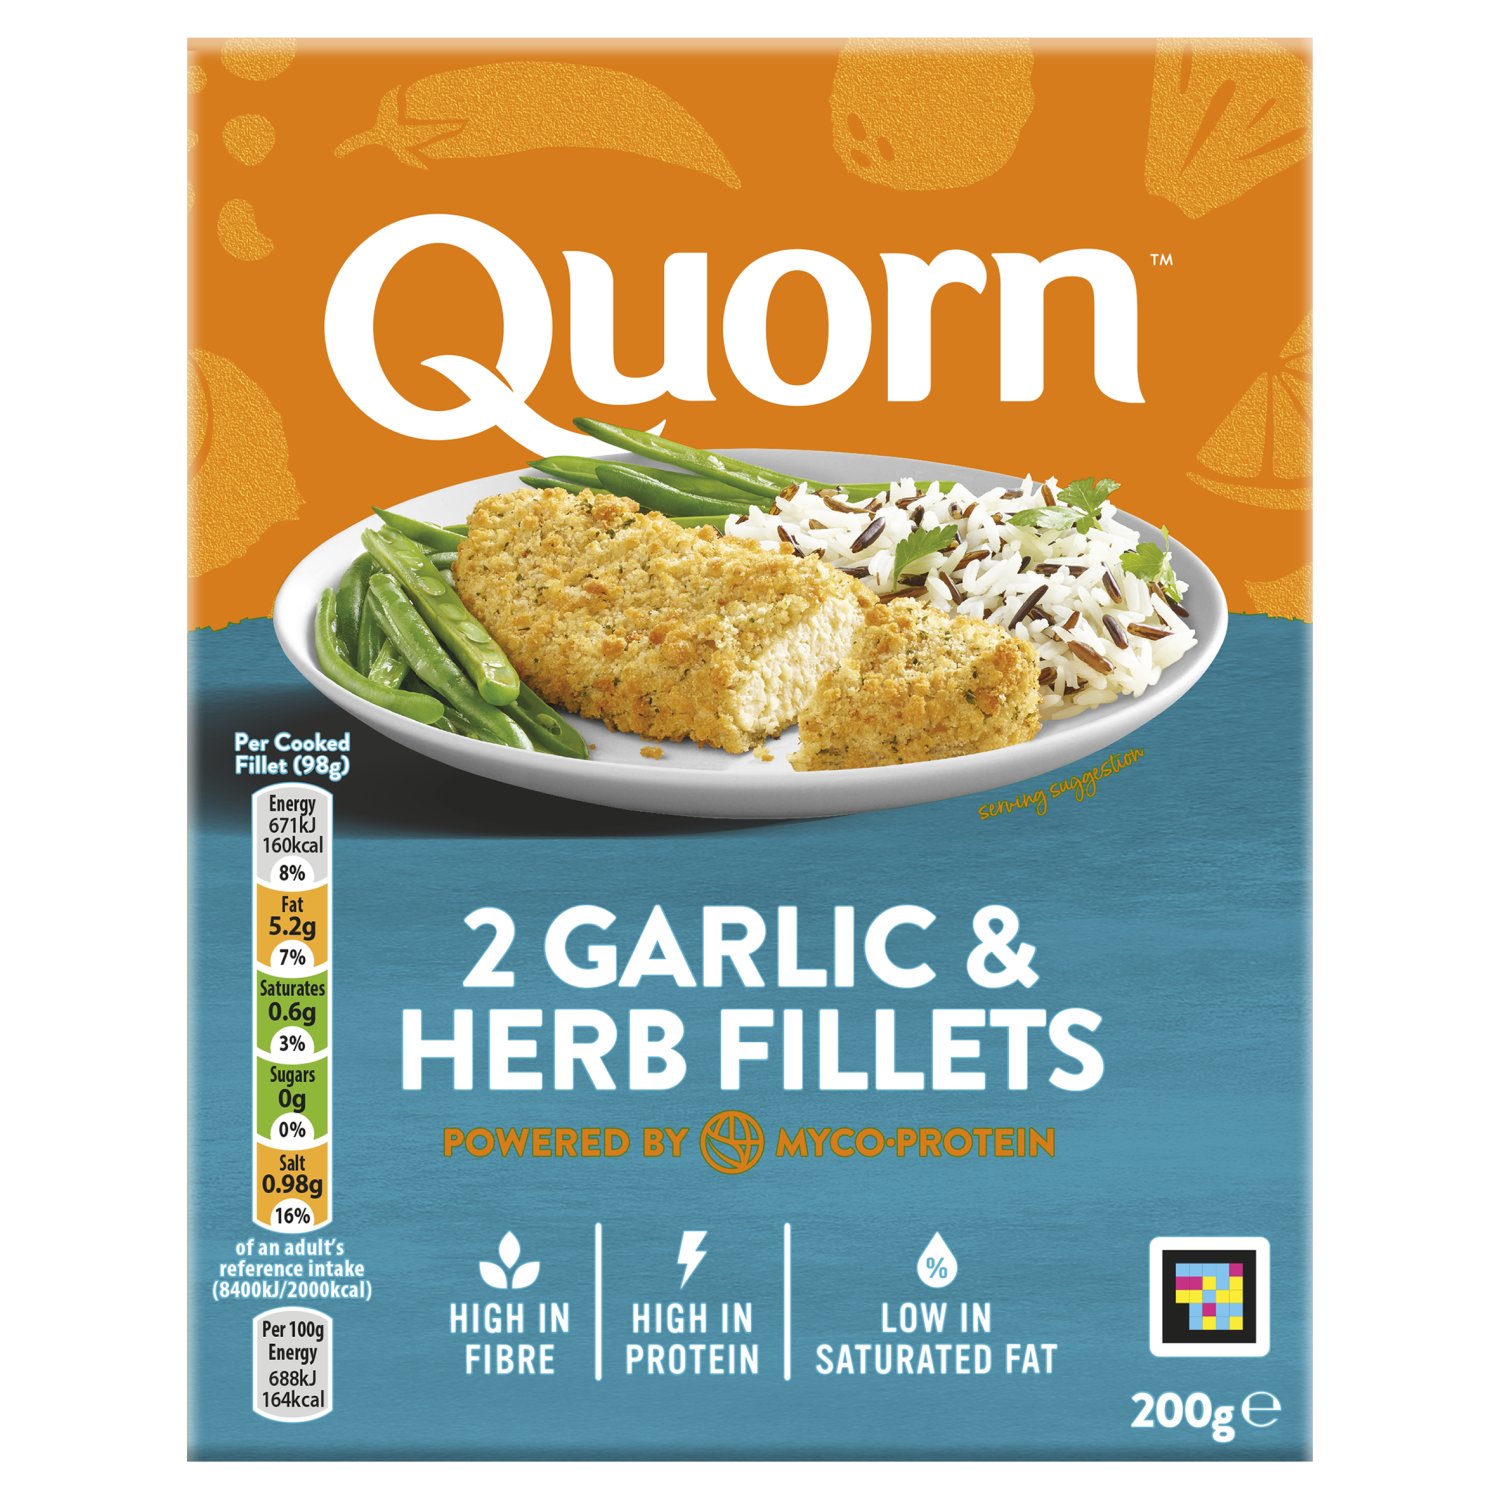 Quorn Garlic and Herb Fillets 2 Pack (200 g)